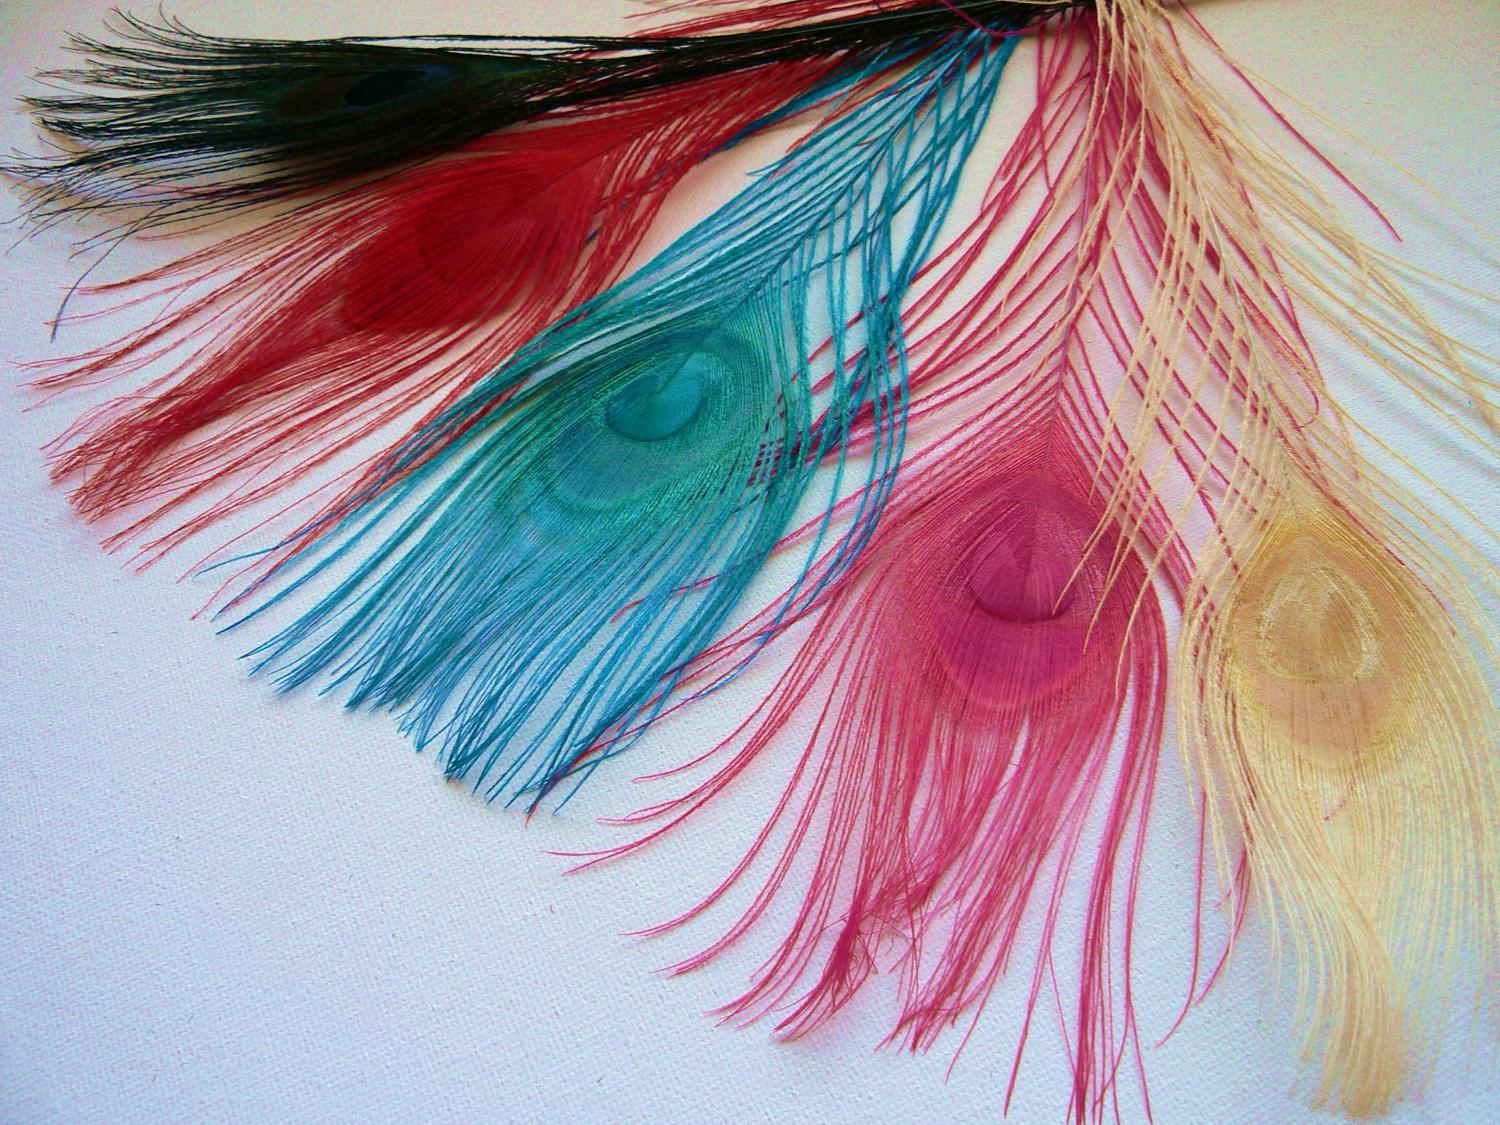 50 Turquoise Peacock Feathers